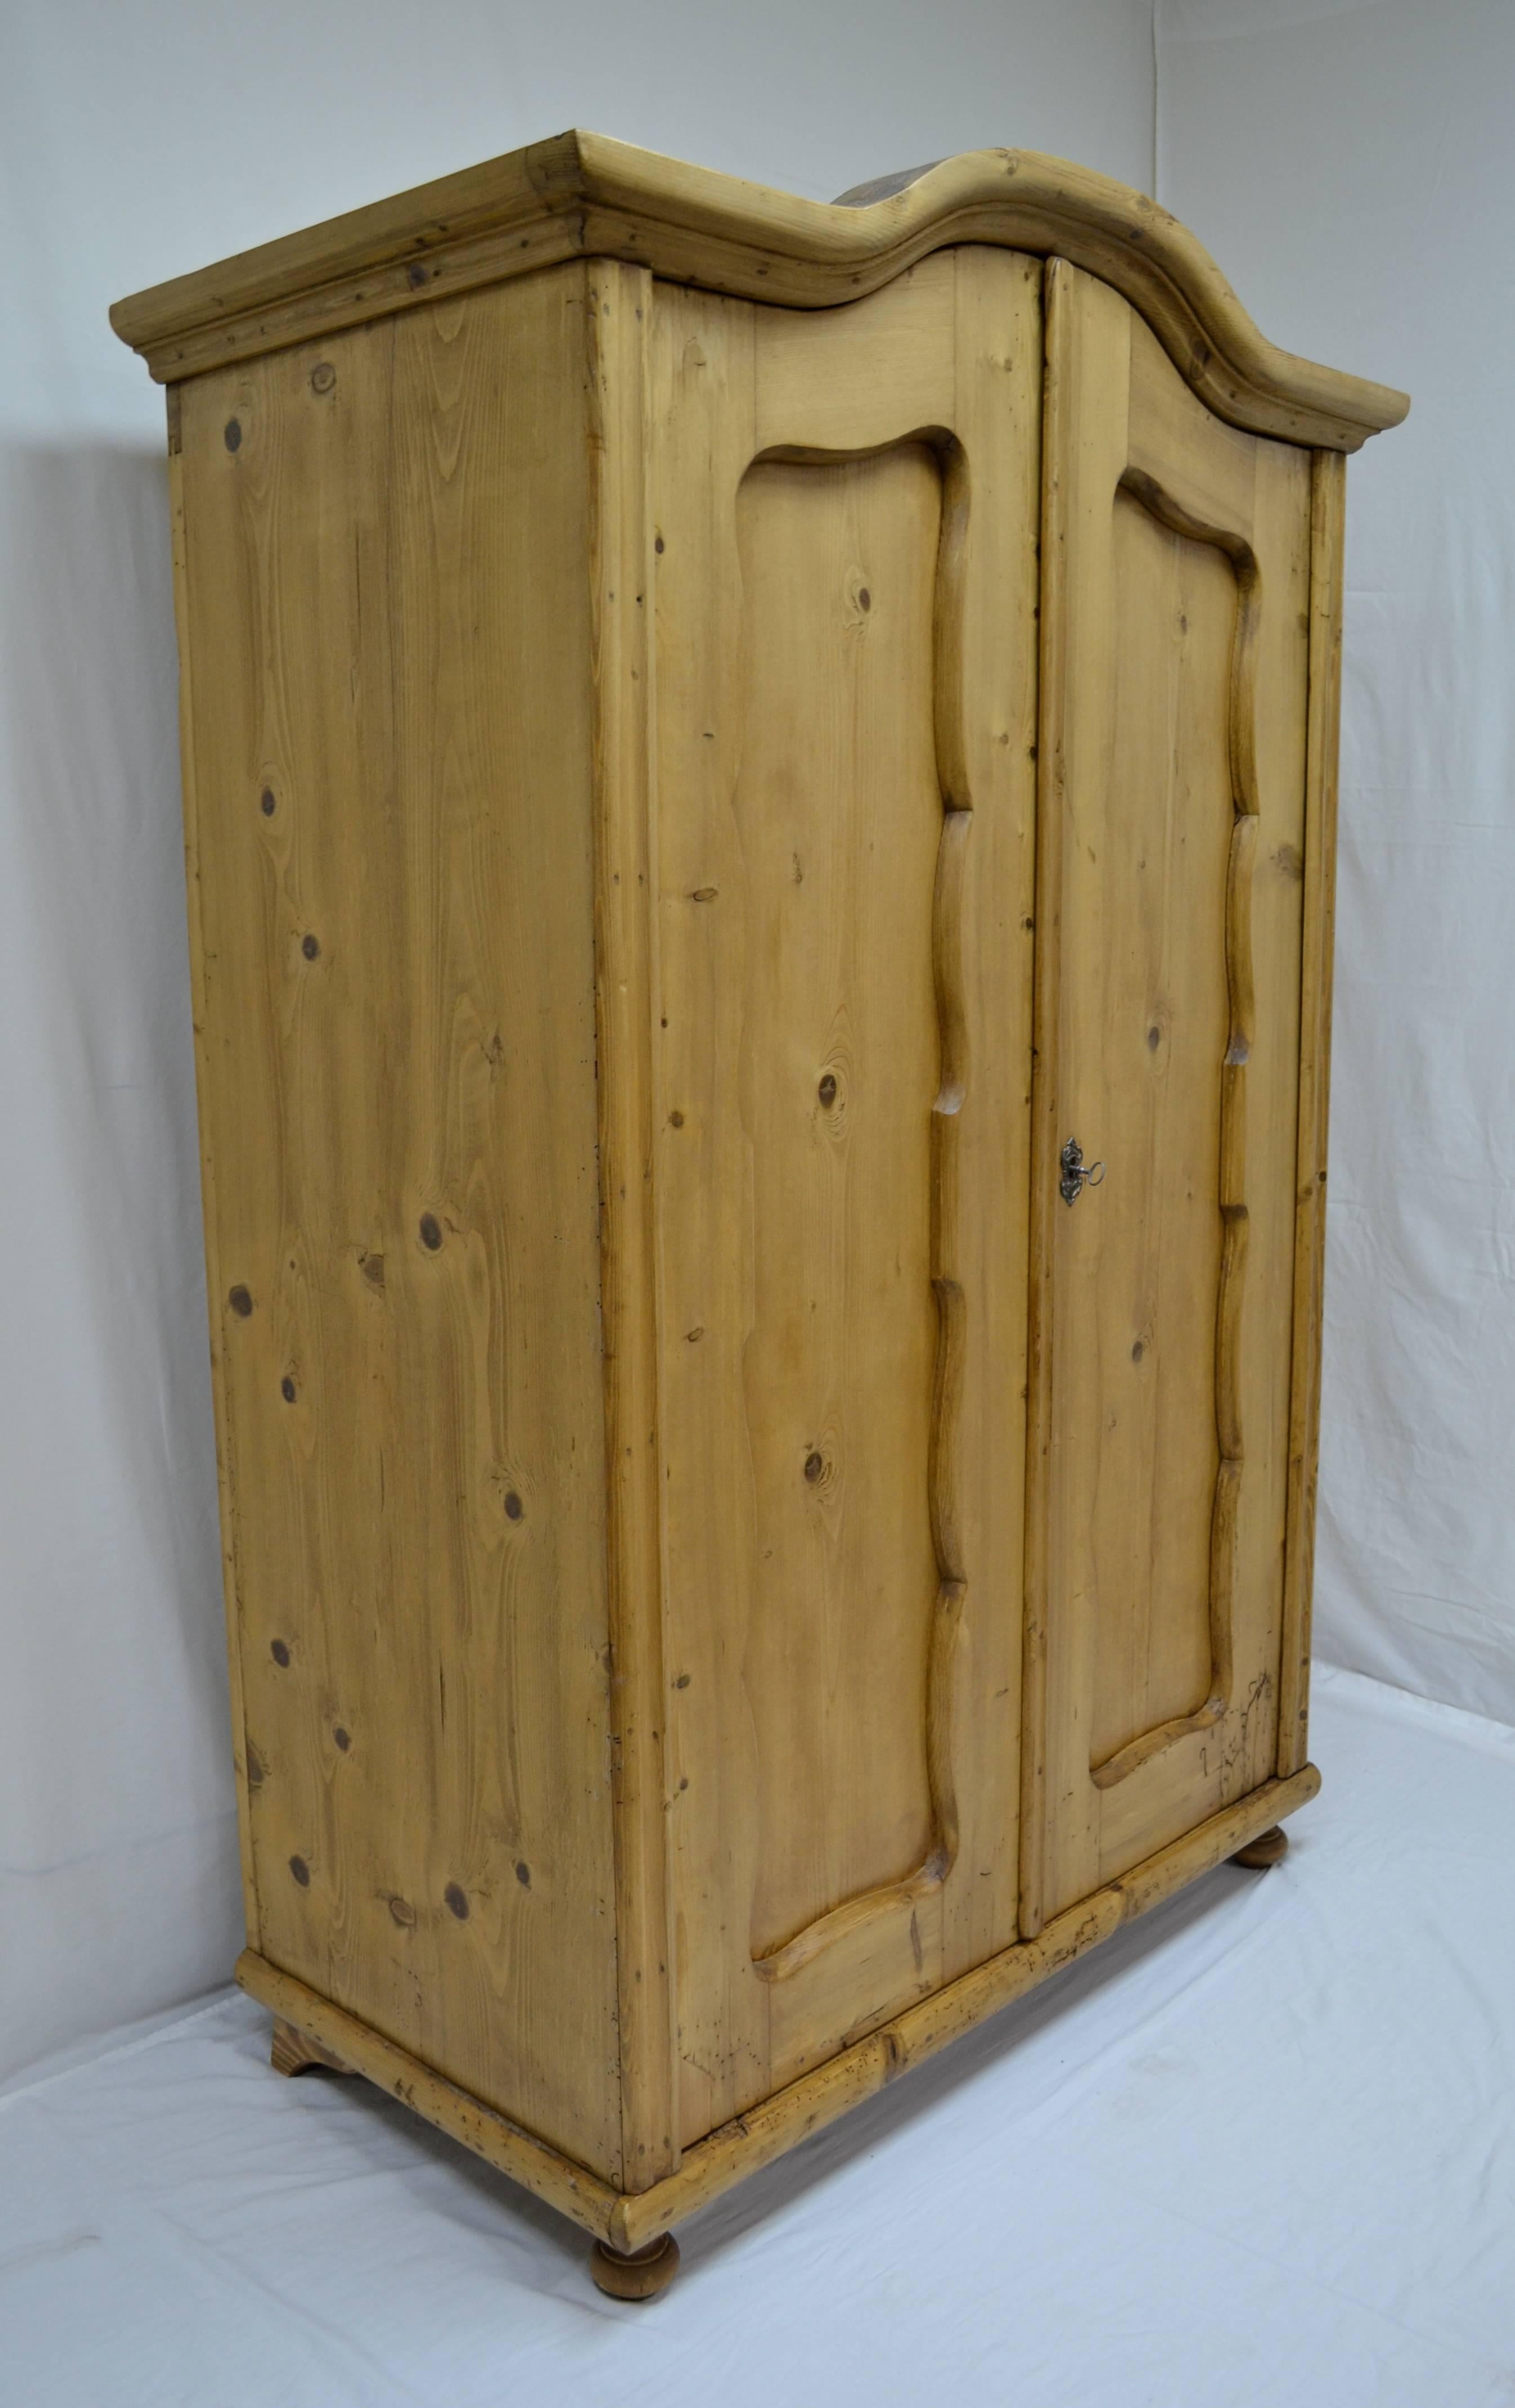 This is an unusually deep Baroque style pine armoire with a thick bonnet top crown molding. The door frames are scalloped to give beautiful curves to the panels, and arched to follow the line of the crown. The front corner moldings are a single bold